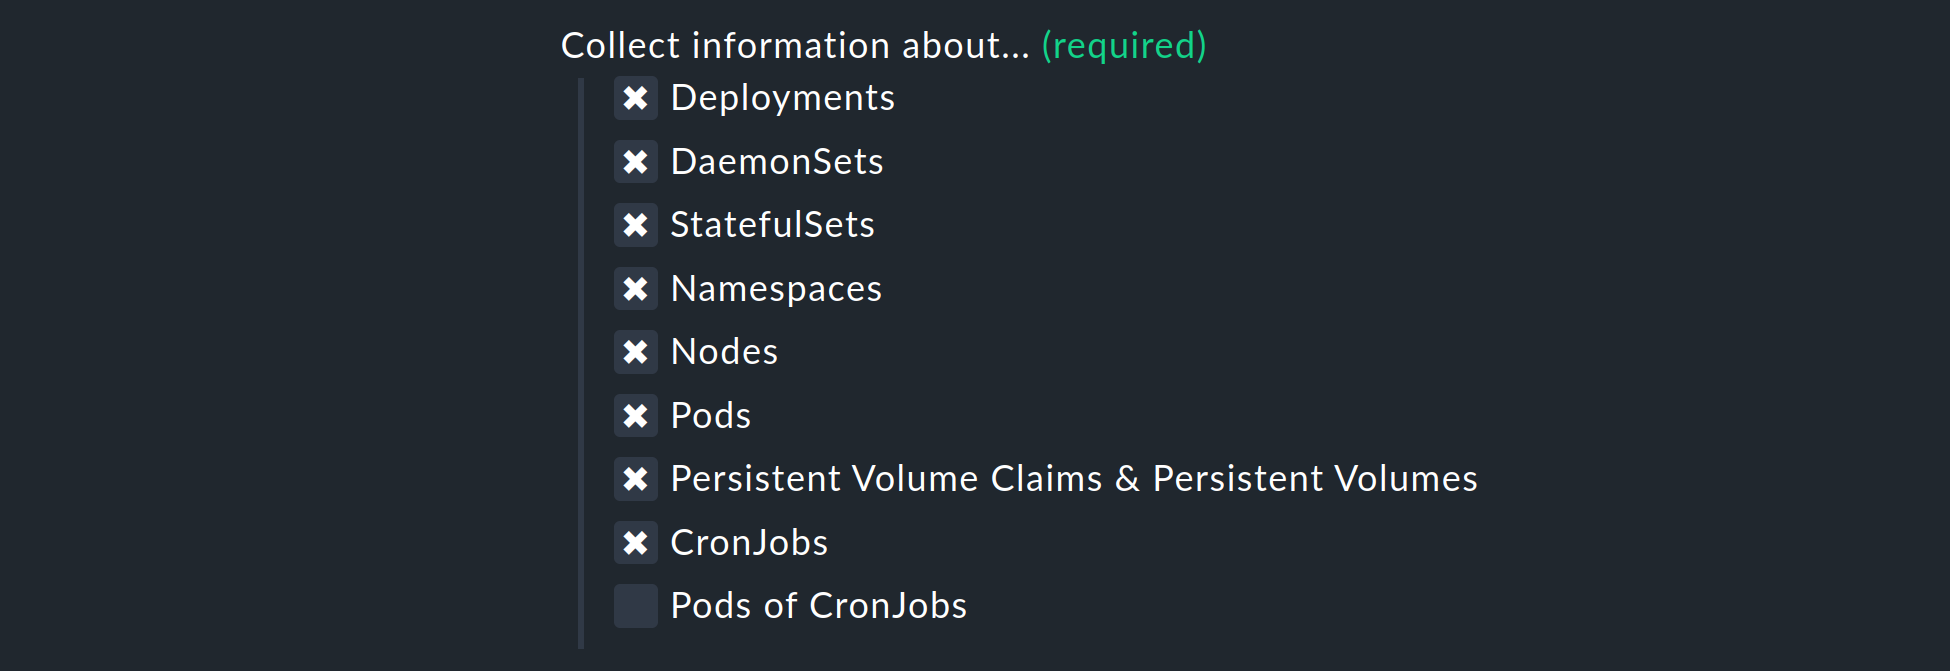 Example list of a selection of Kubernetes objects that are to be monitored.